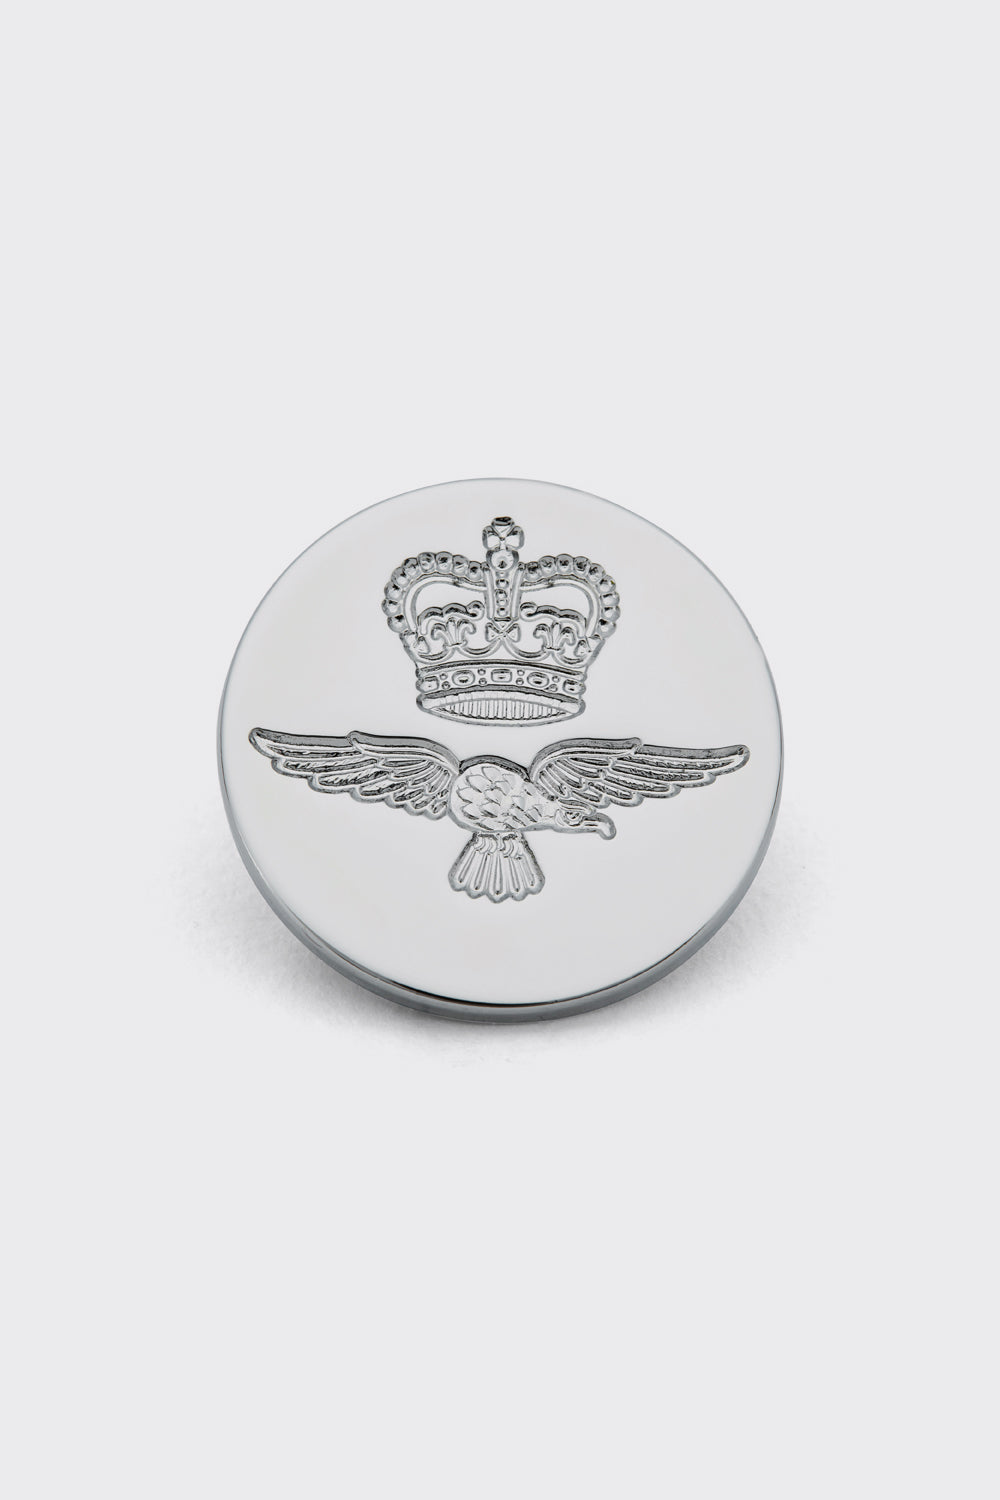 RAF Blazer Button - Flat Indented Wings Silver